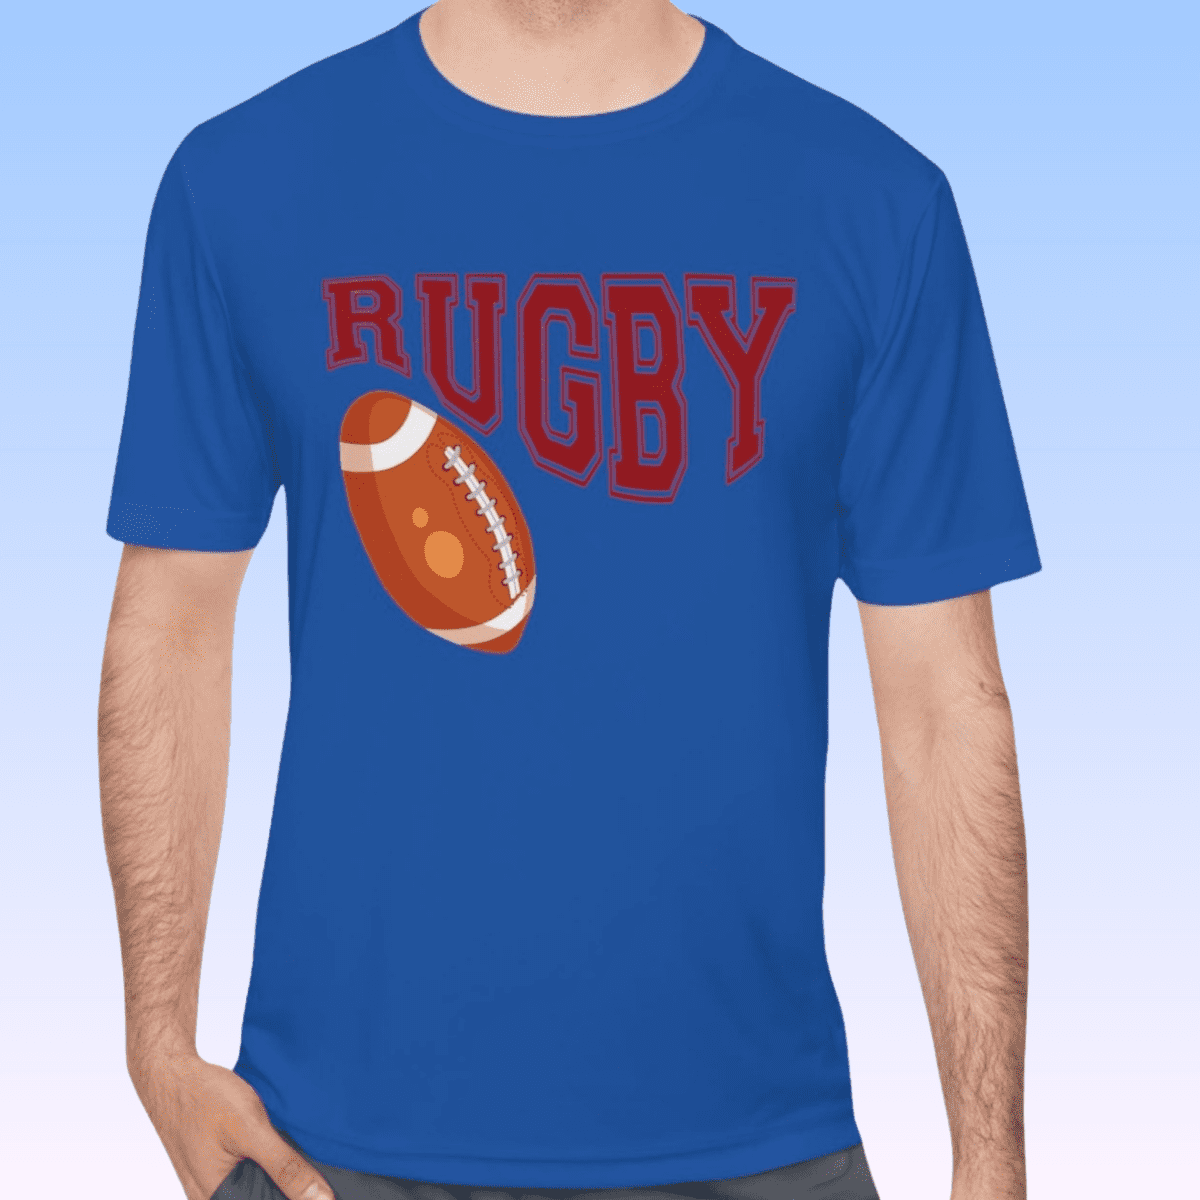 Men's Royal Rugby Moisture Wicking Tee